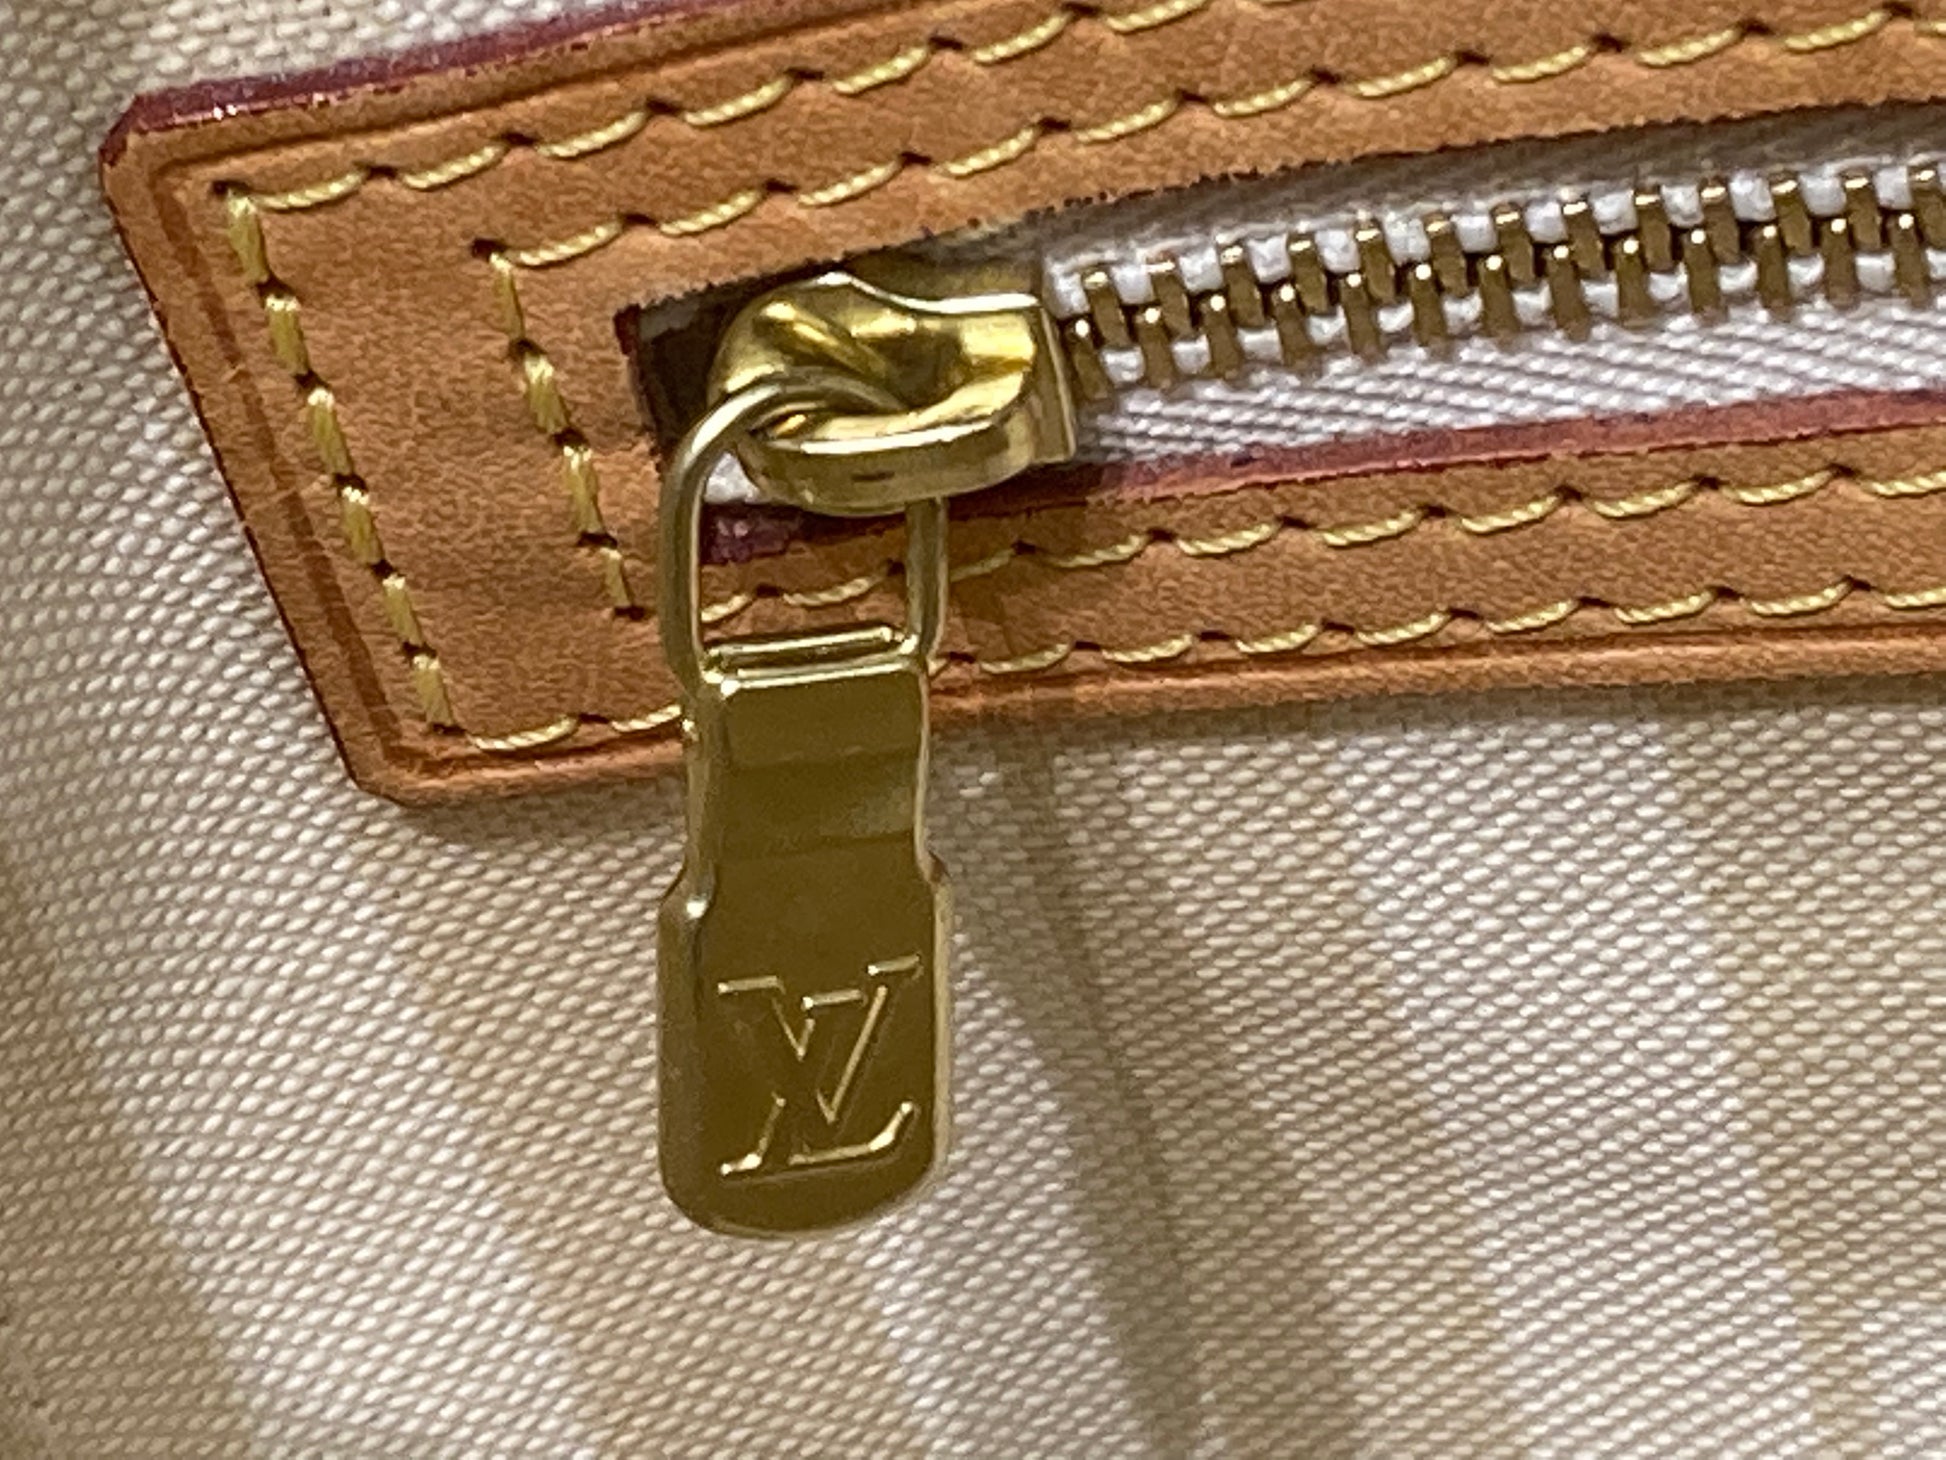 Louis Vuitton Limited Rare Stripe Monogram Rayures Neverfull MM Tote 4LV1019